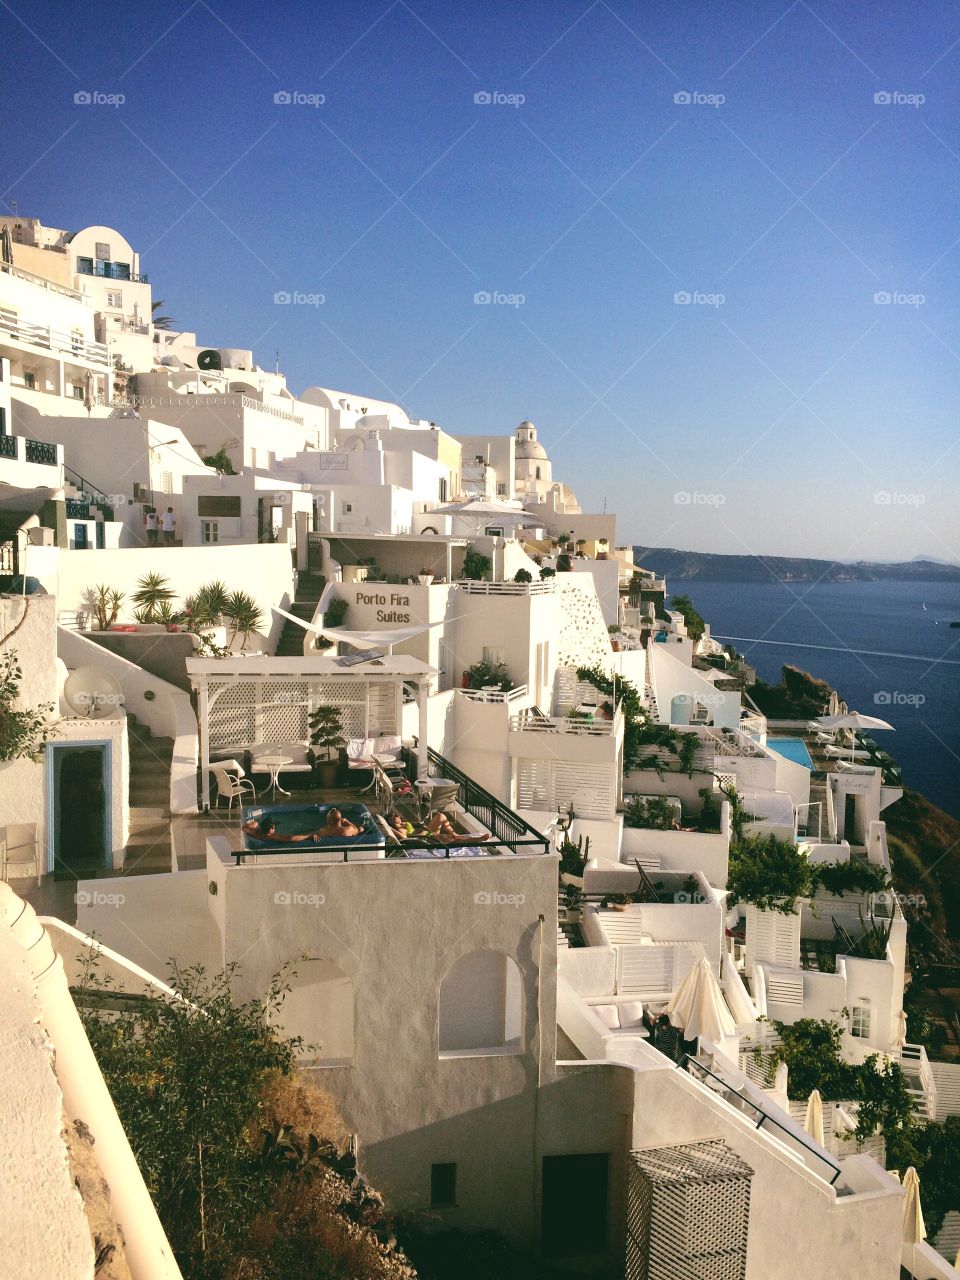 Santorini perfection . View of the beautiful and iconic white architecture of Santorini, Greece